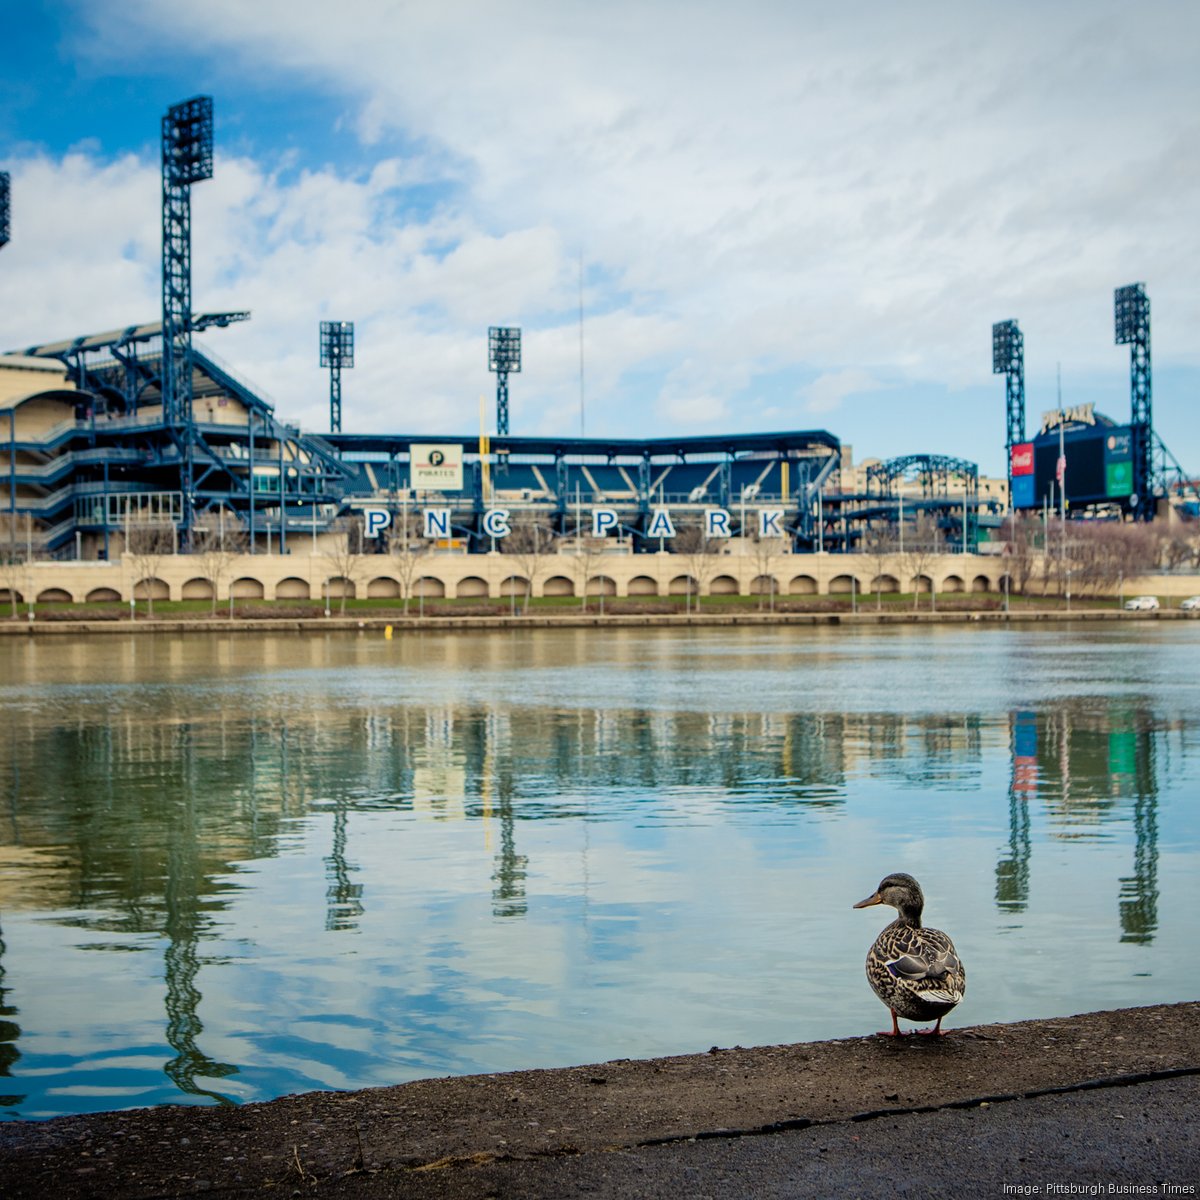 Pittsburgh Pirates - Happy National Bird Day to our favorite bird